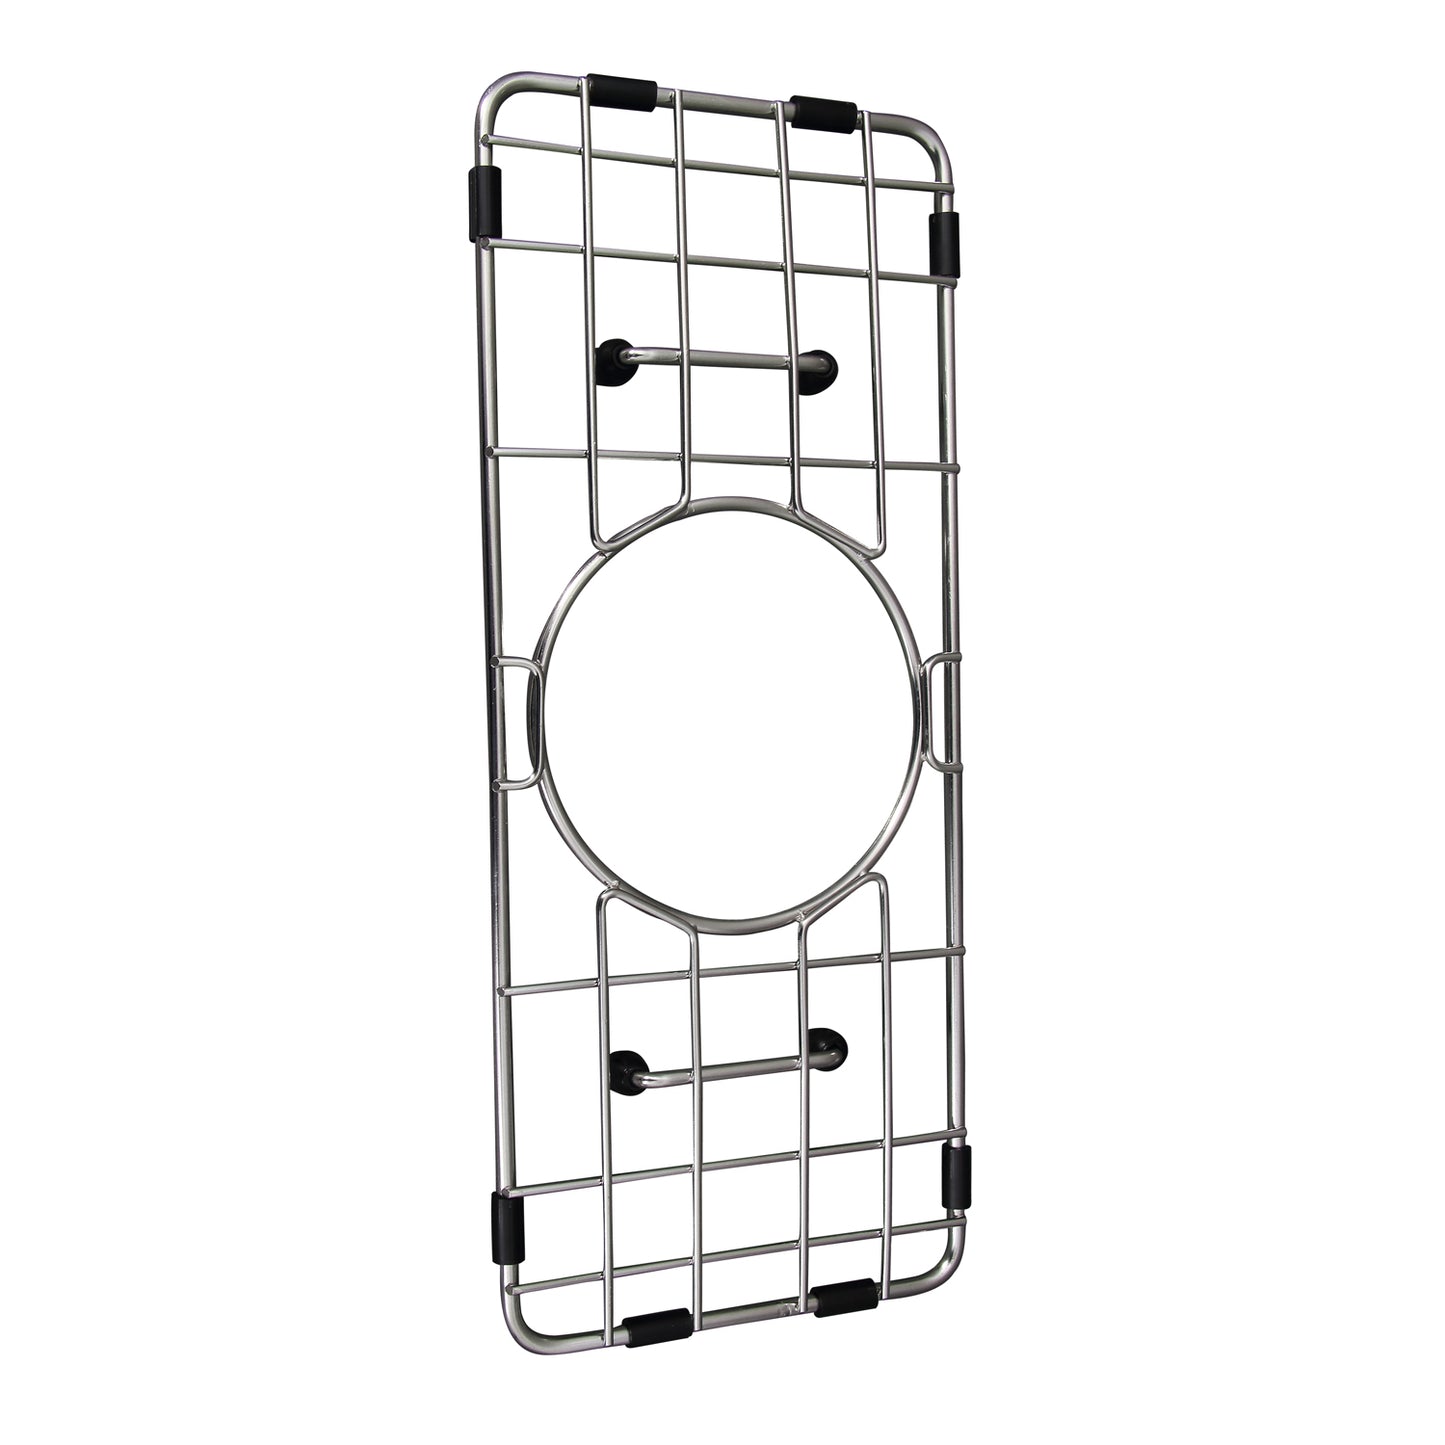 Stainless Steel Wire Grid for KS23 Single Bowl Sink